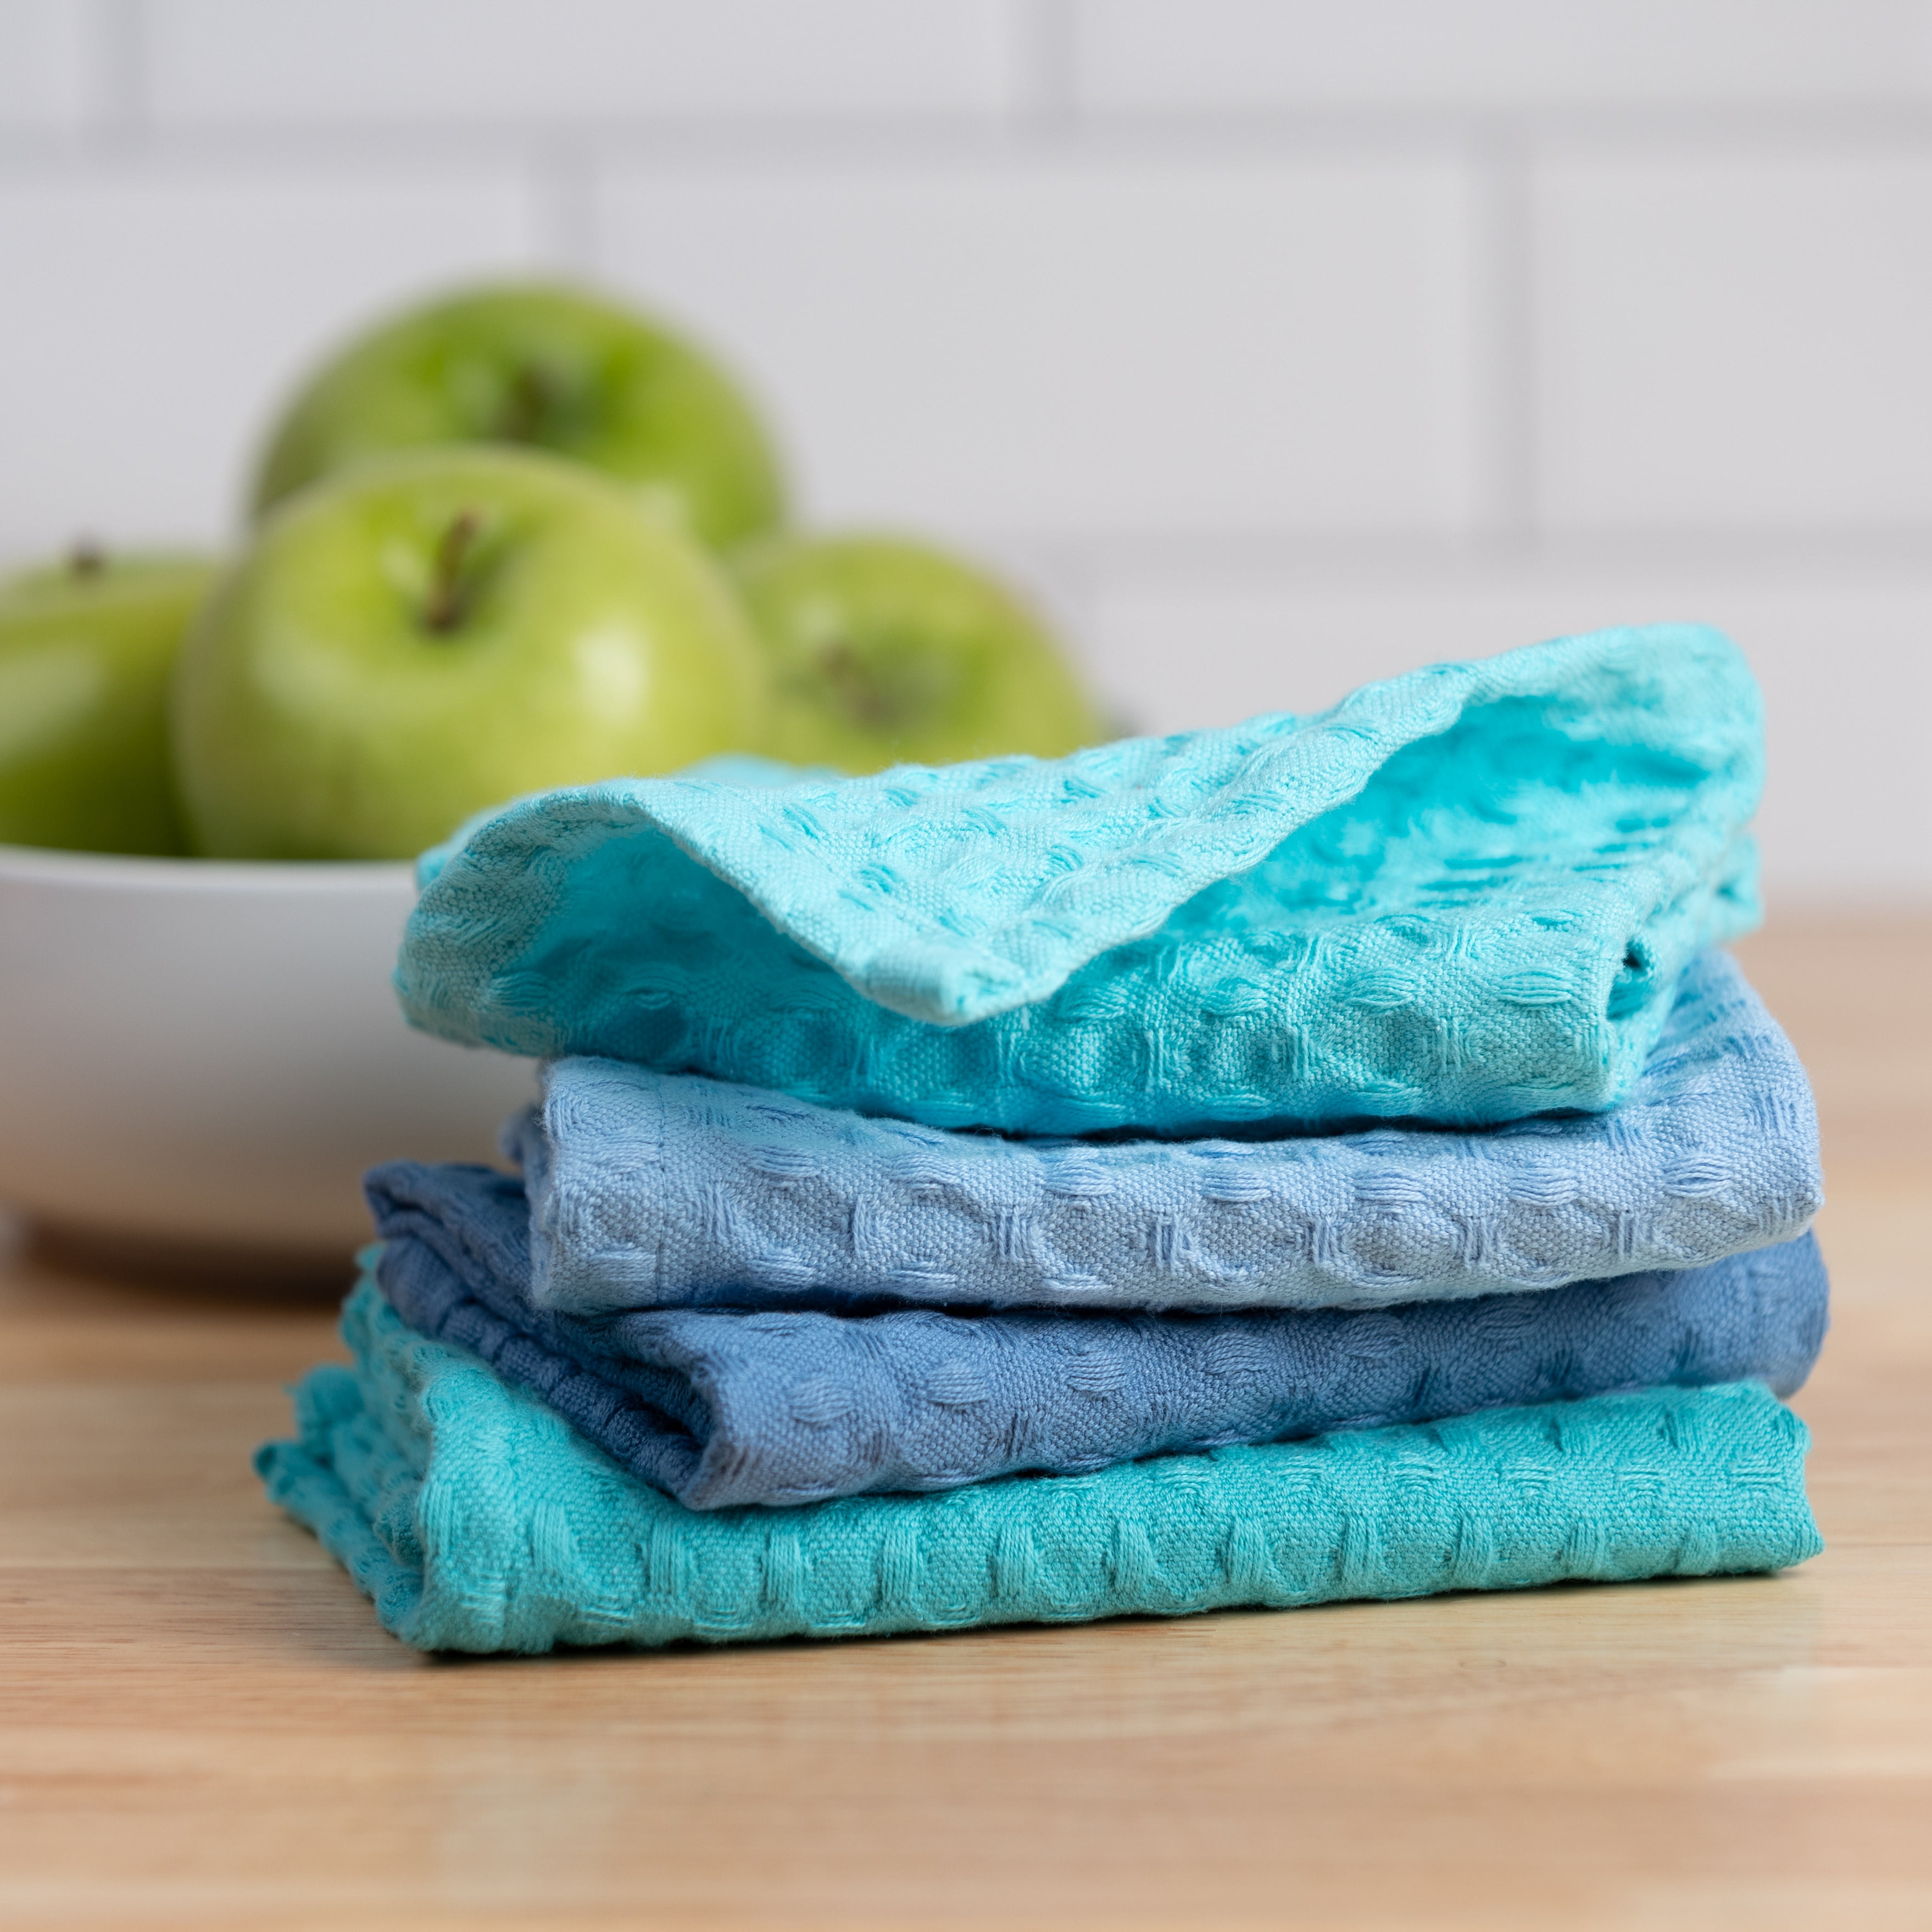 Everyday Living Solid Blue Dish Cloths, 4 pk - King Soopers